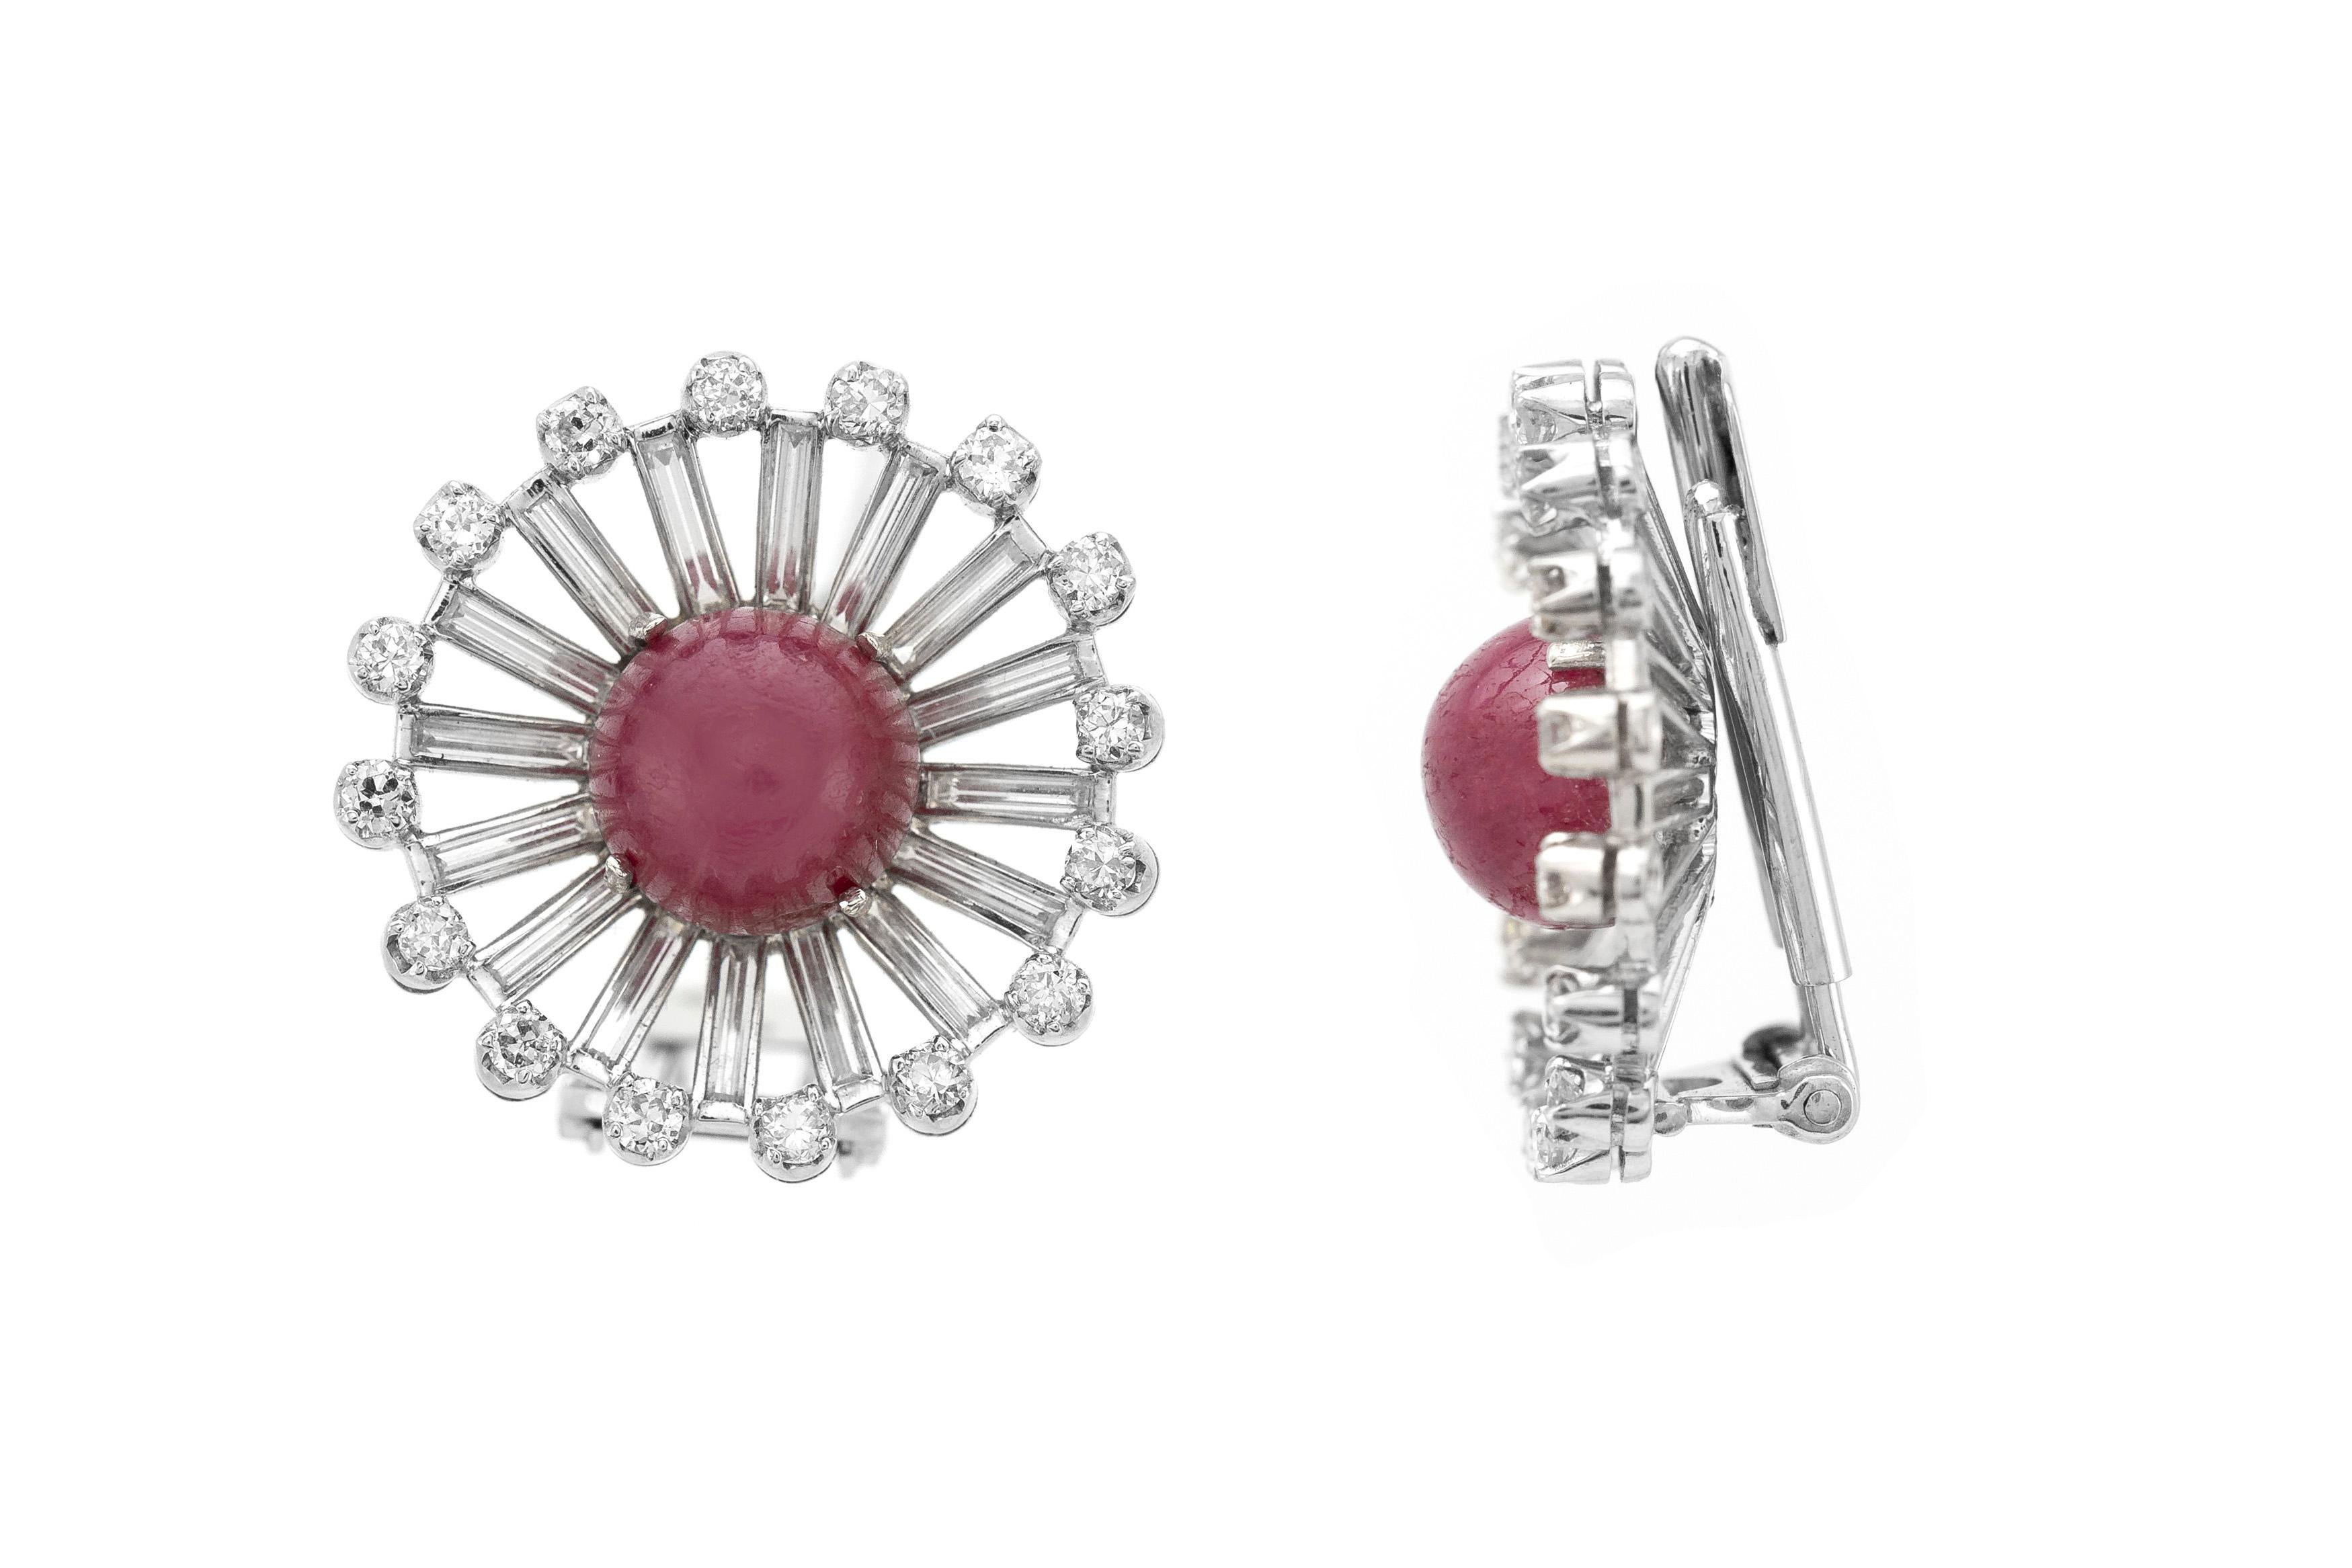 The earring is finely crafted in platinum with two ruby as center stone with diamonds weighing approximately total of 5.50 carat.